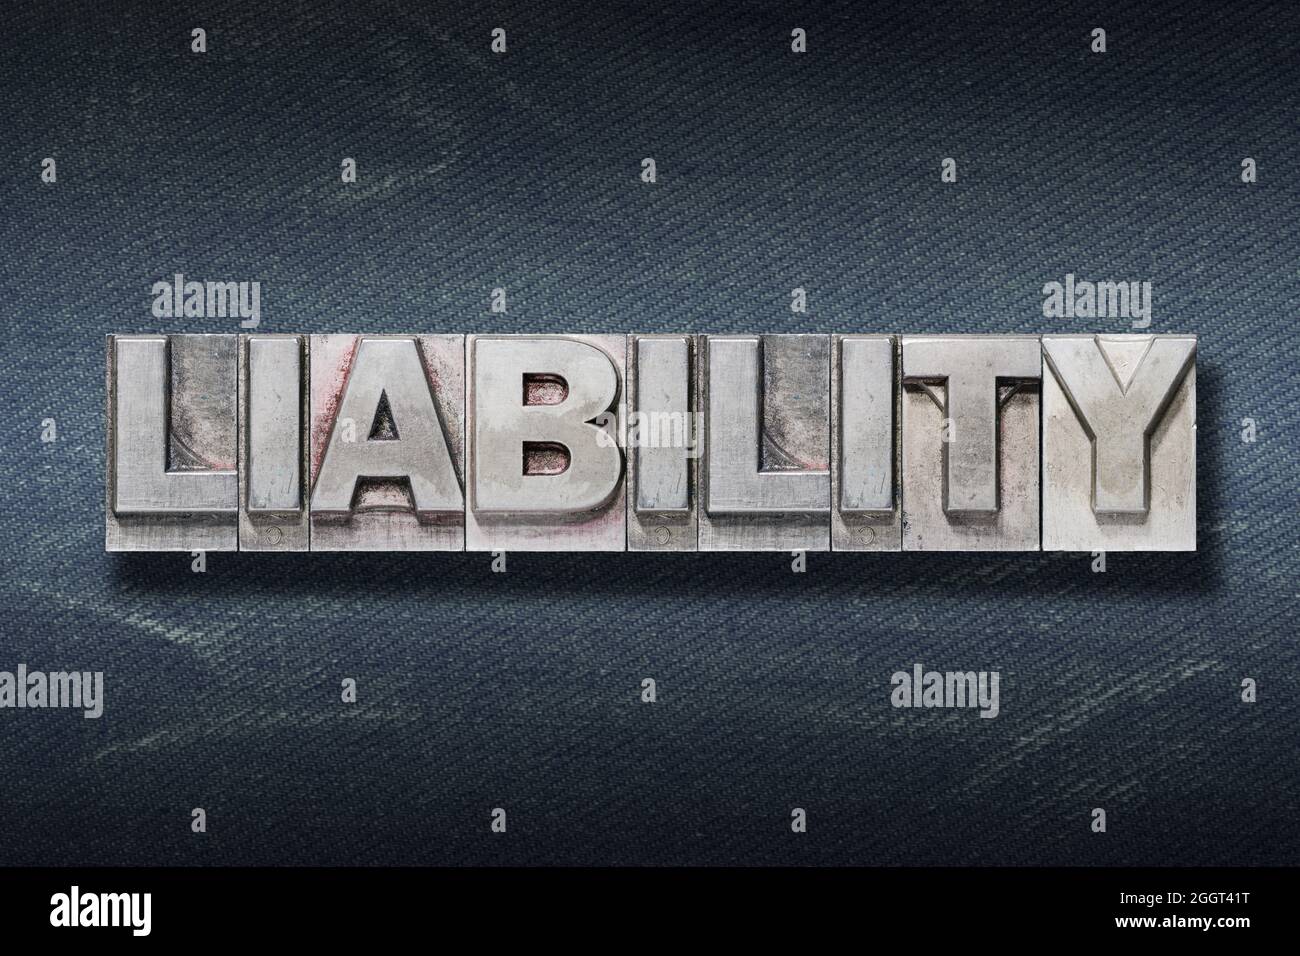 liability word made from metallic letterpress on dark jeans background Stock Photo